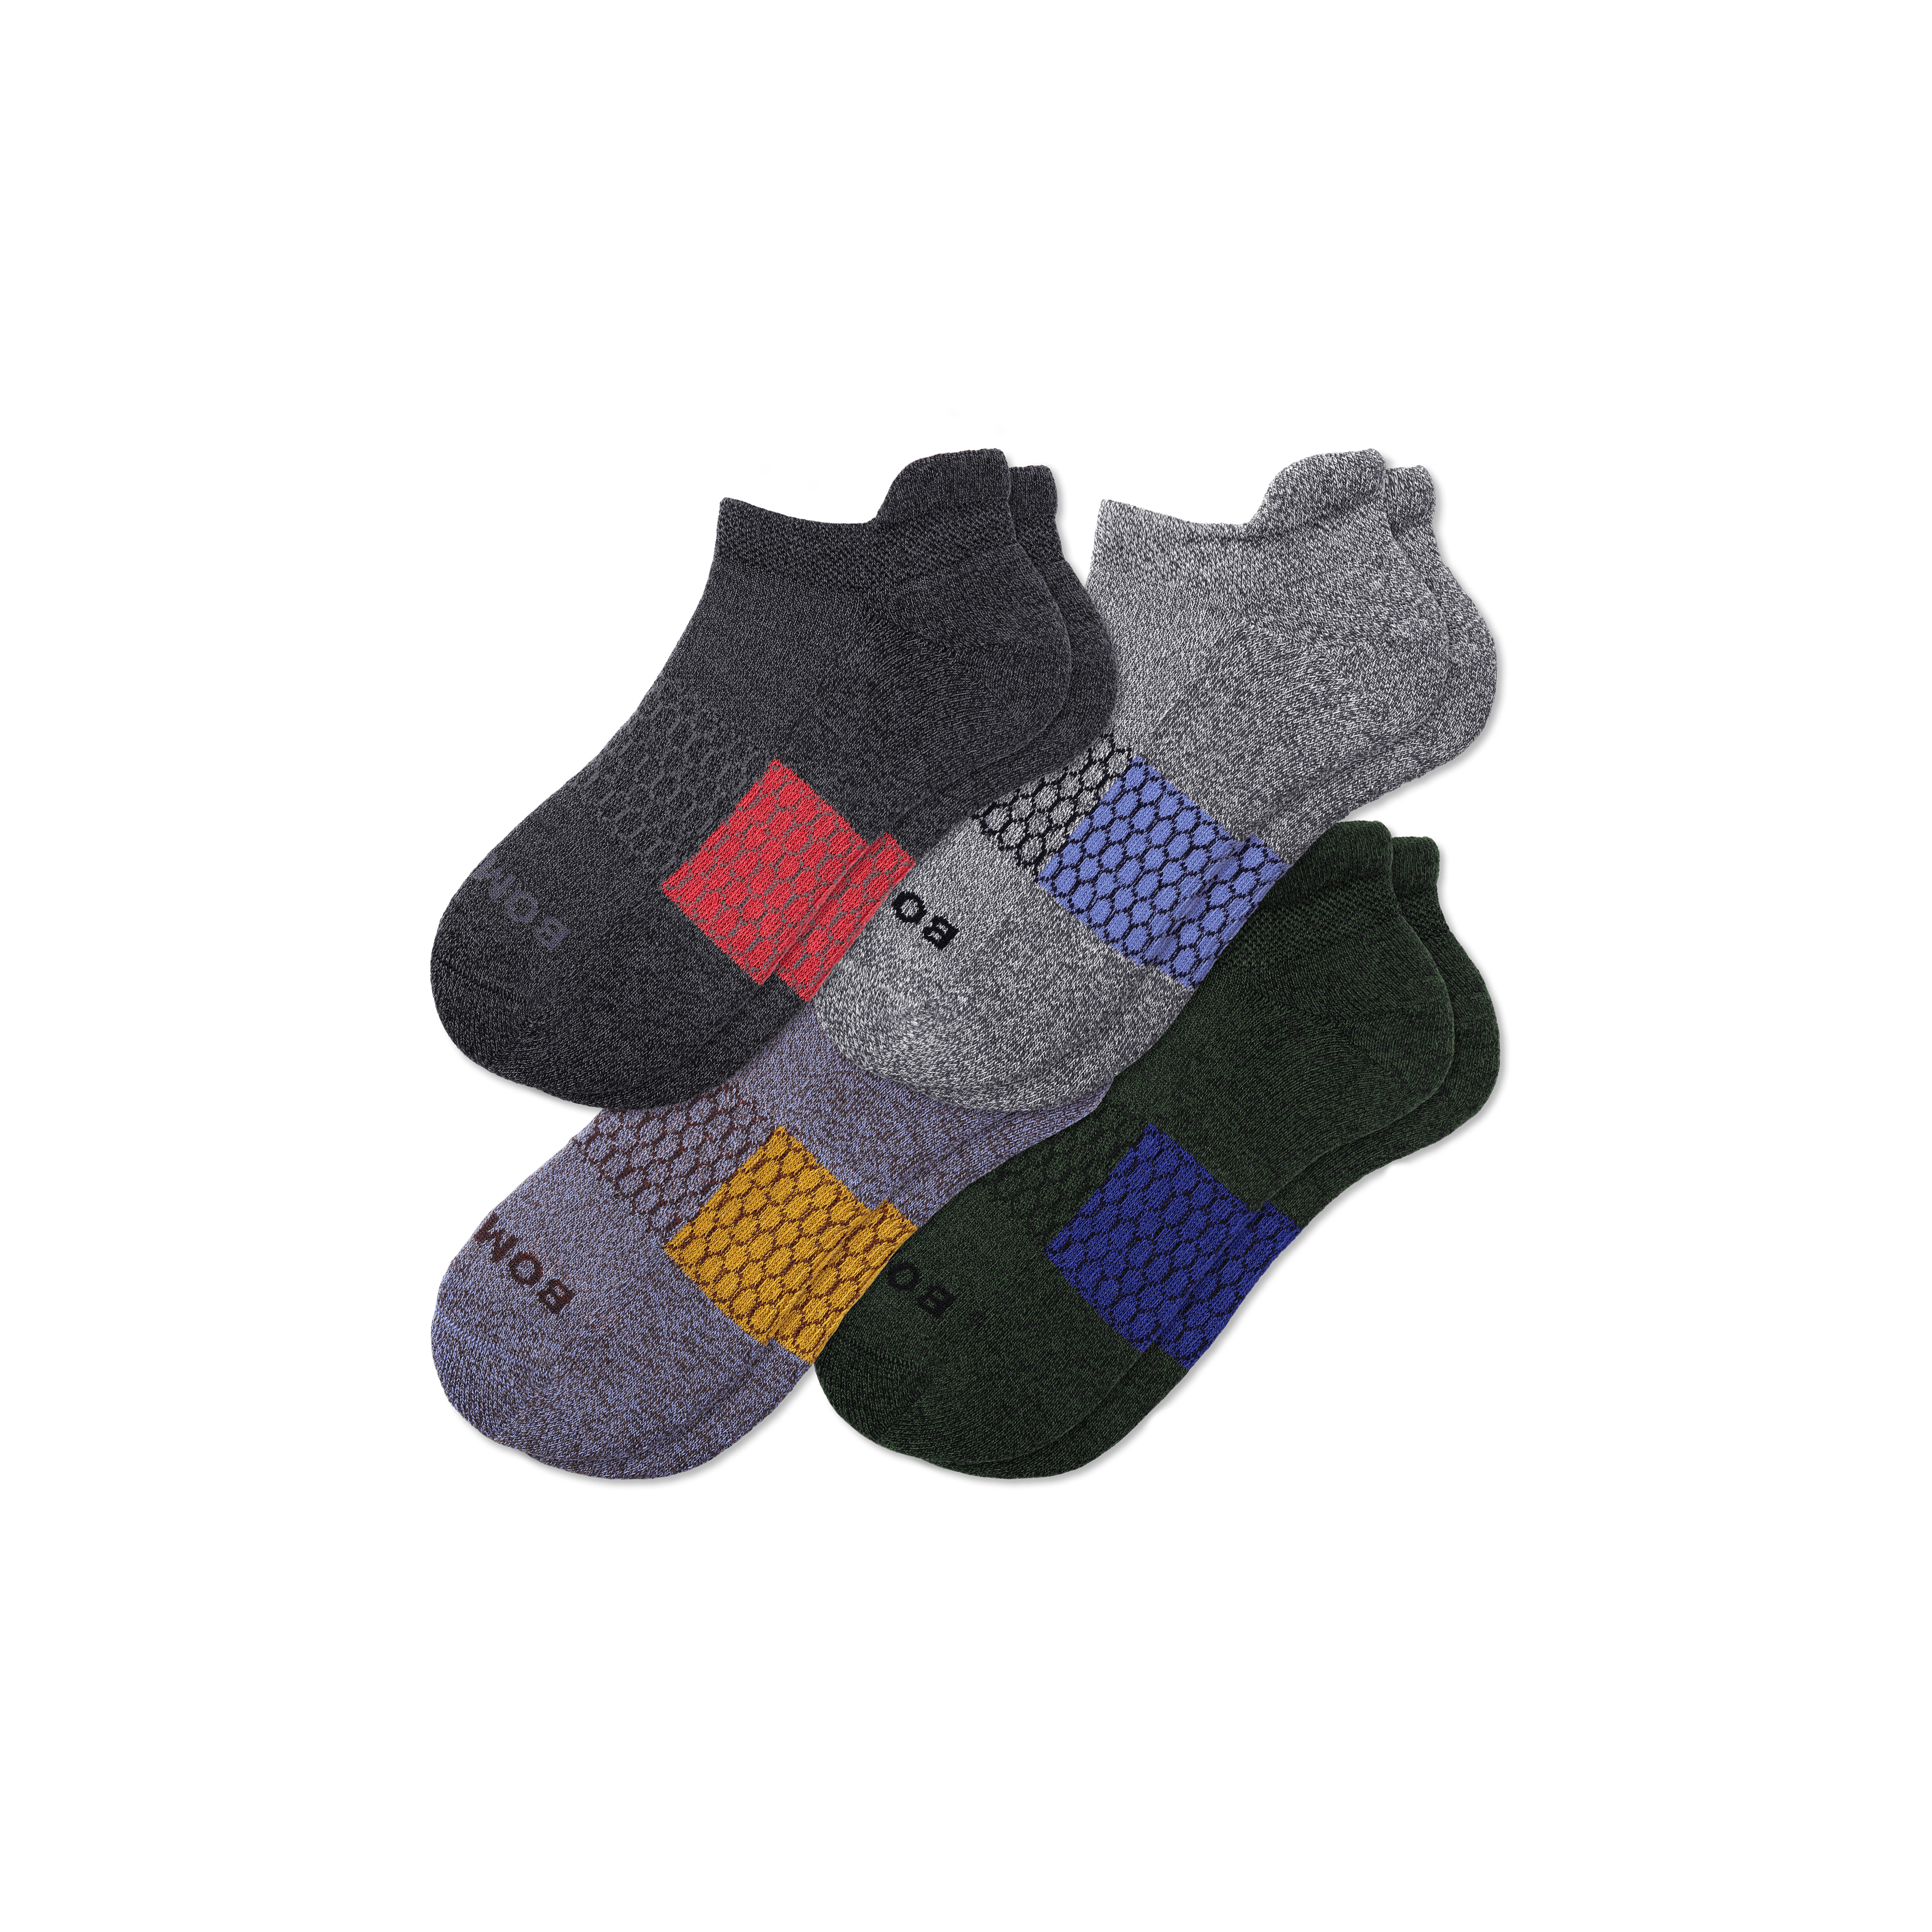 Bombas Marl Ankle Sock 4-pack In Black Galaxy Mix